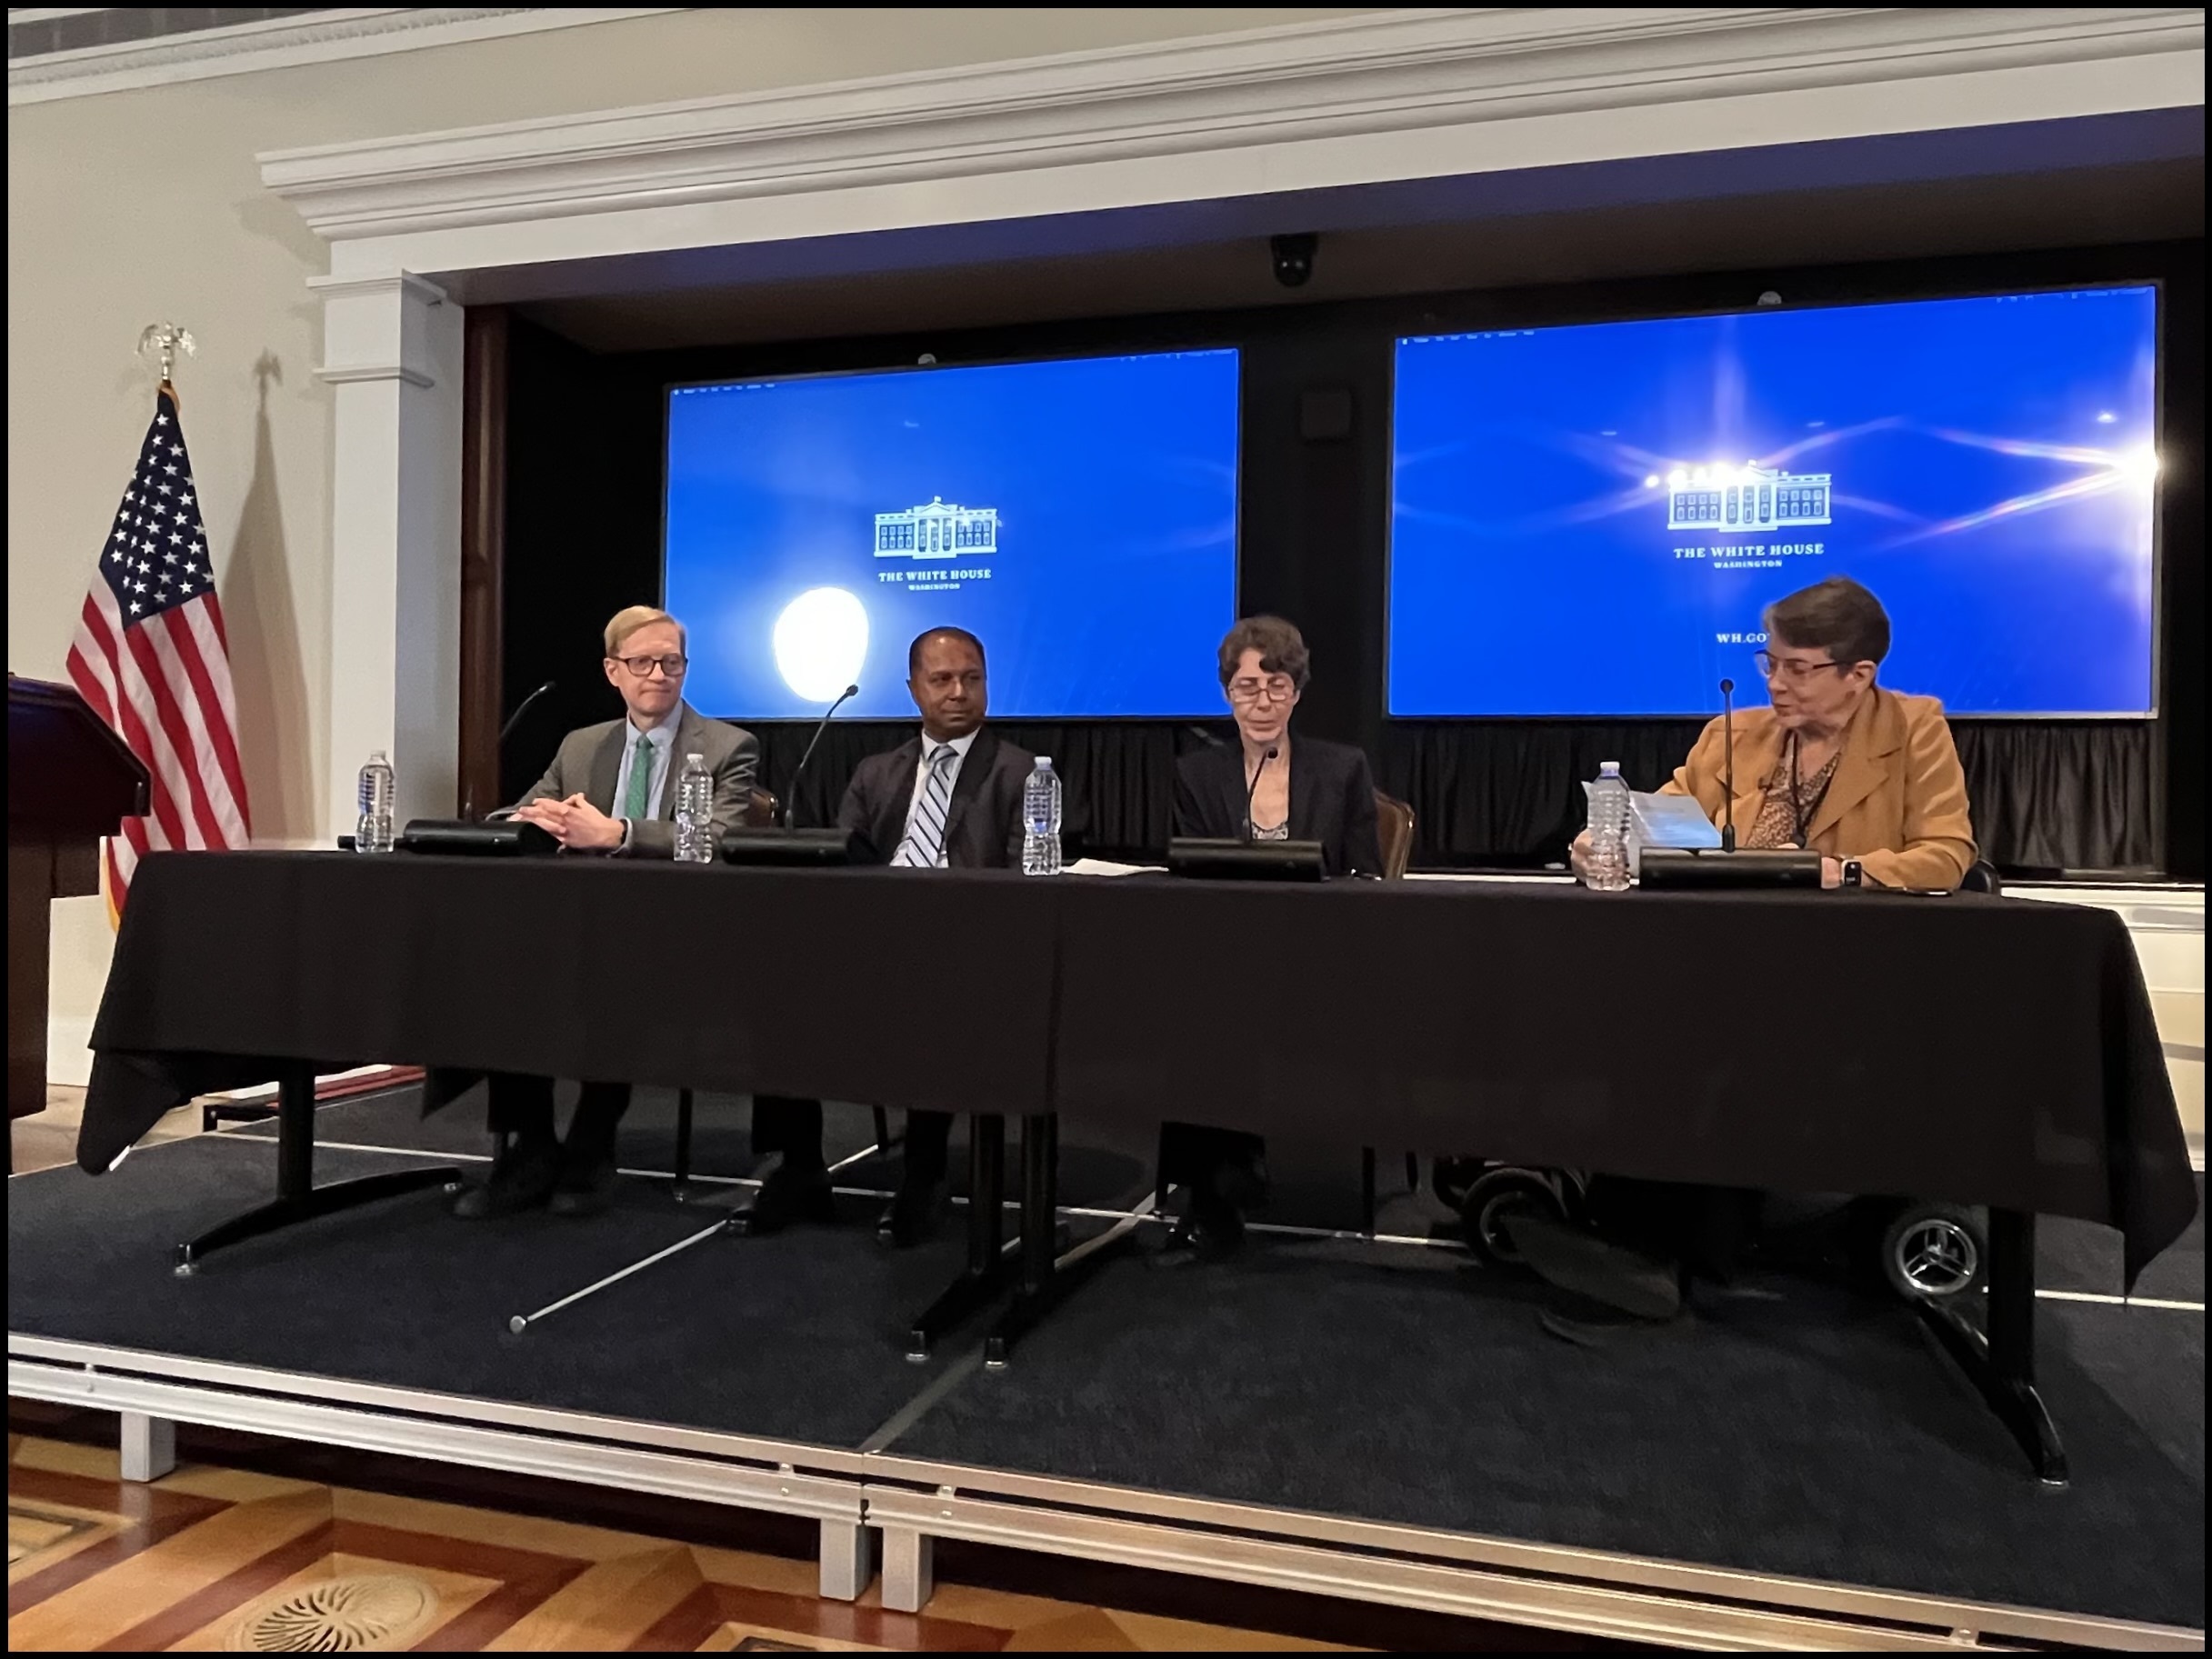 Jennifer Mathis, DOJ; Sam Bagenstos, HHS; Sachin Pavithran; and Judy Brewer from the White House Office of Science and Technology Policy sit at a table during a panel. Behind them are two screens displaying the White House logo, and to the left is the U.S. flag.